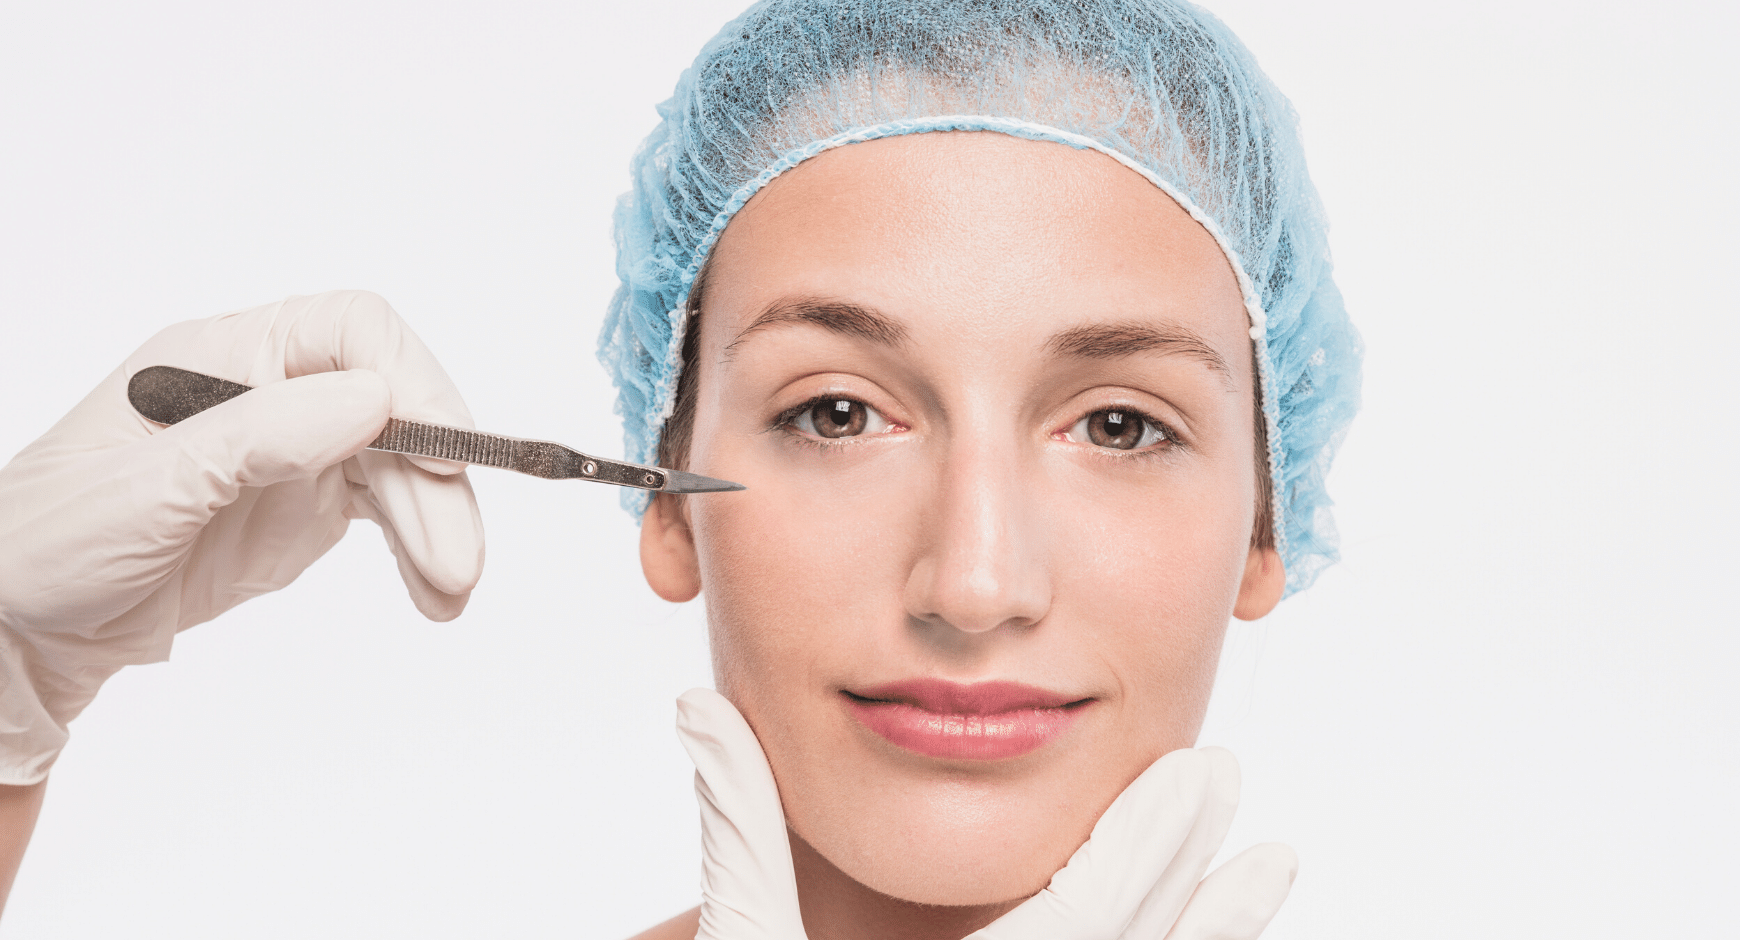 All You Need To Know About The Miracles Of Plastic And Reconstructive Surgery